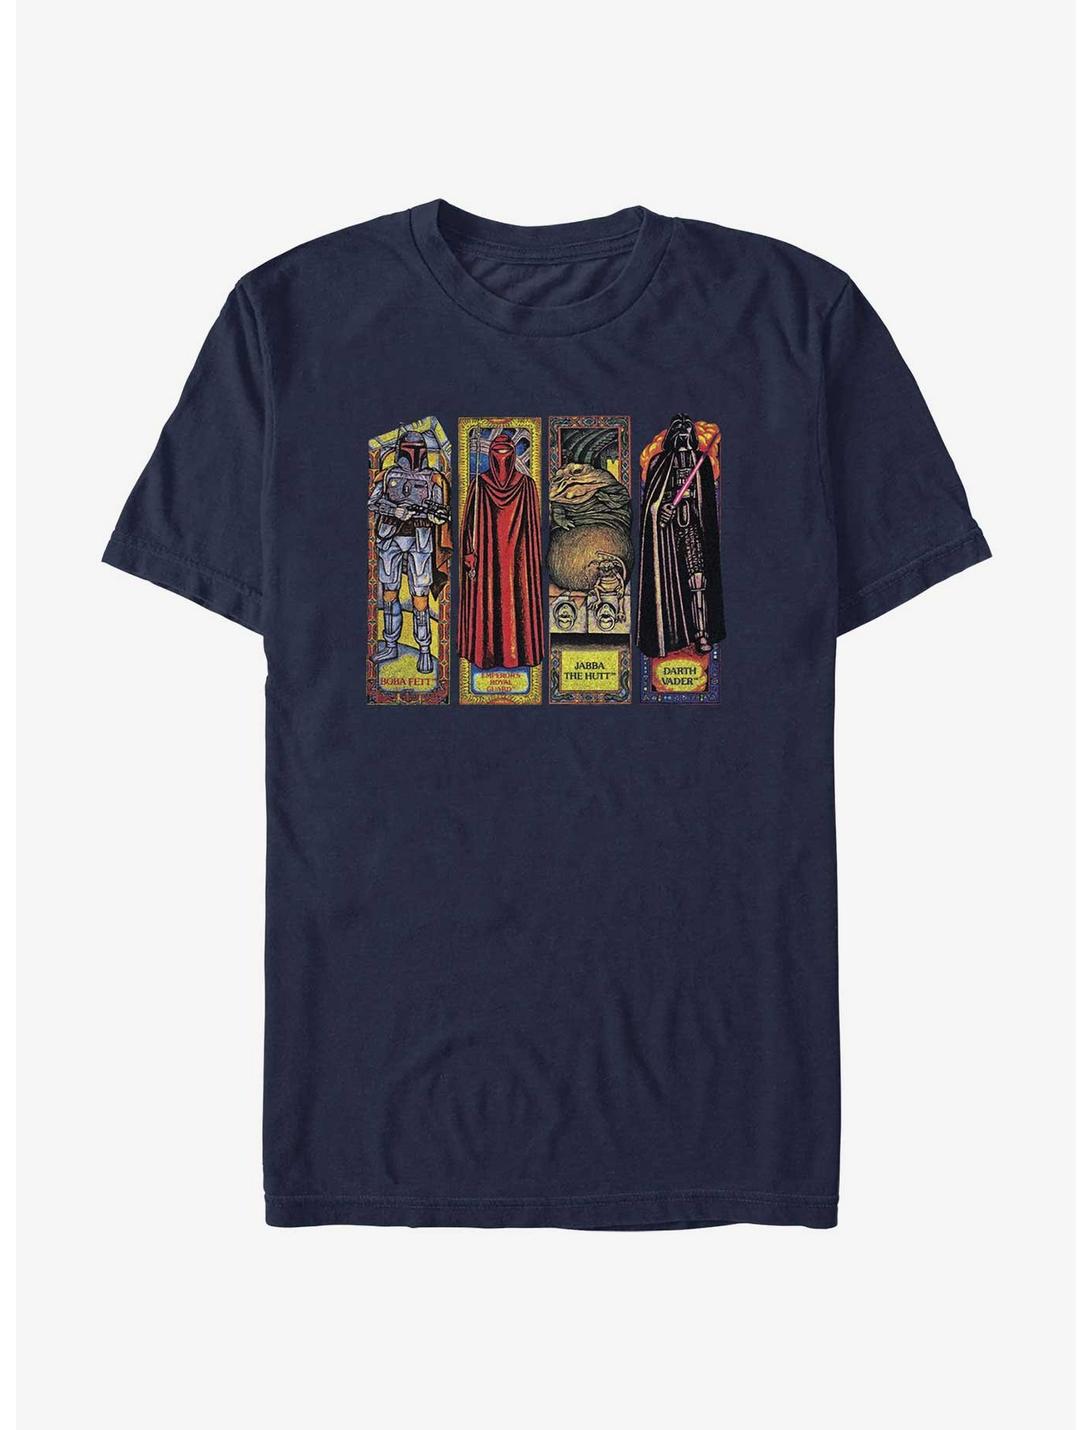 Star Wars Return Of The Jedi Stained Glass Character PanelsT-Shirt, NAVY, hi-res